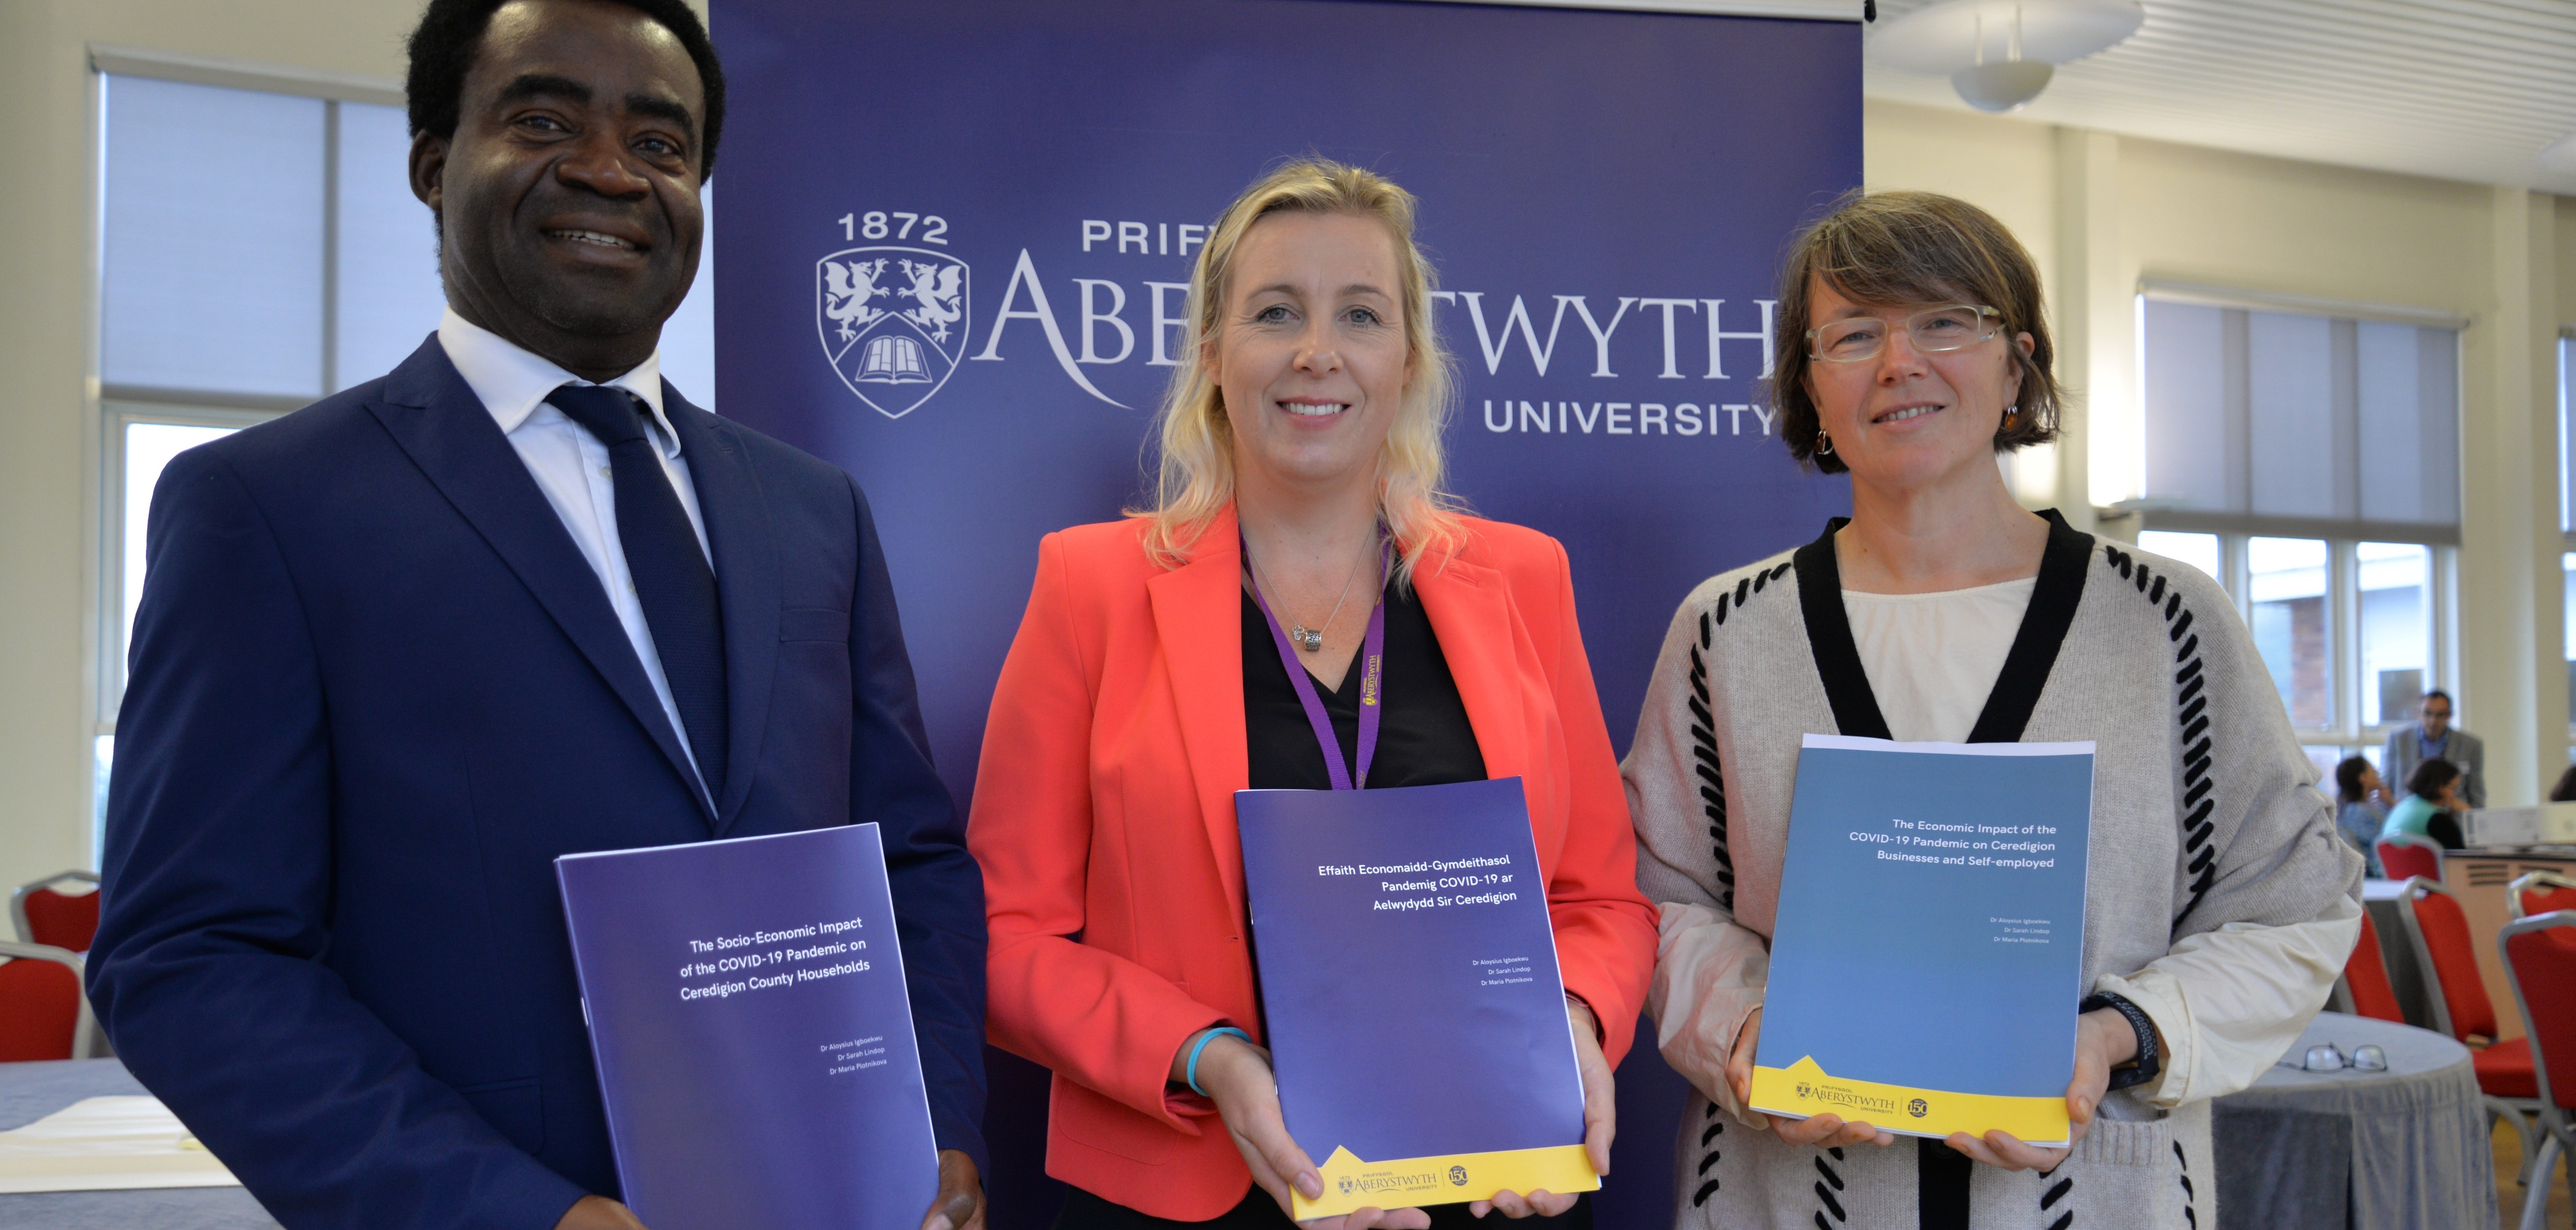 Left to right: Dr Aloysius Igboekwu, Dr Sarah Lindop and Dr Maria Plotnikova from the Aberystwyth Business School who studied the effects of the COVID-19 pandemic on businesses and households in Ceredigion.